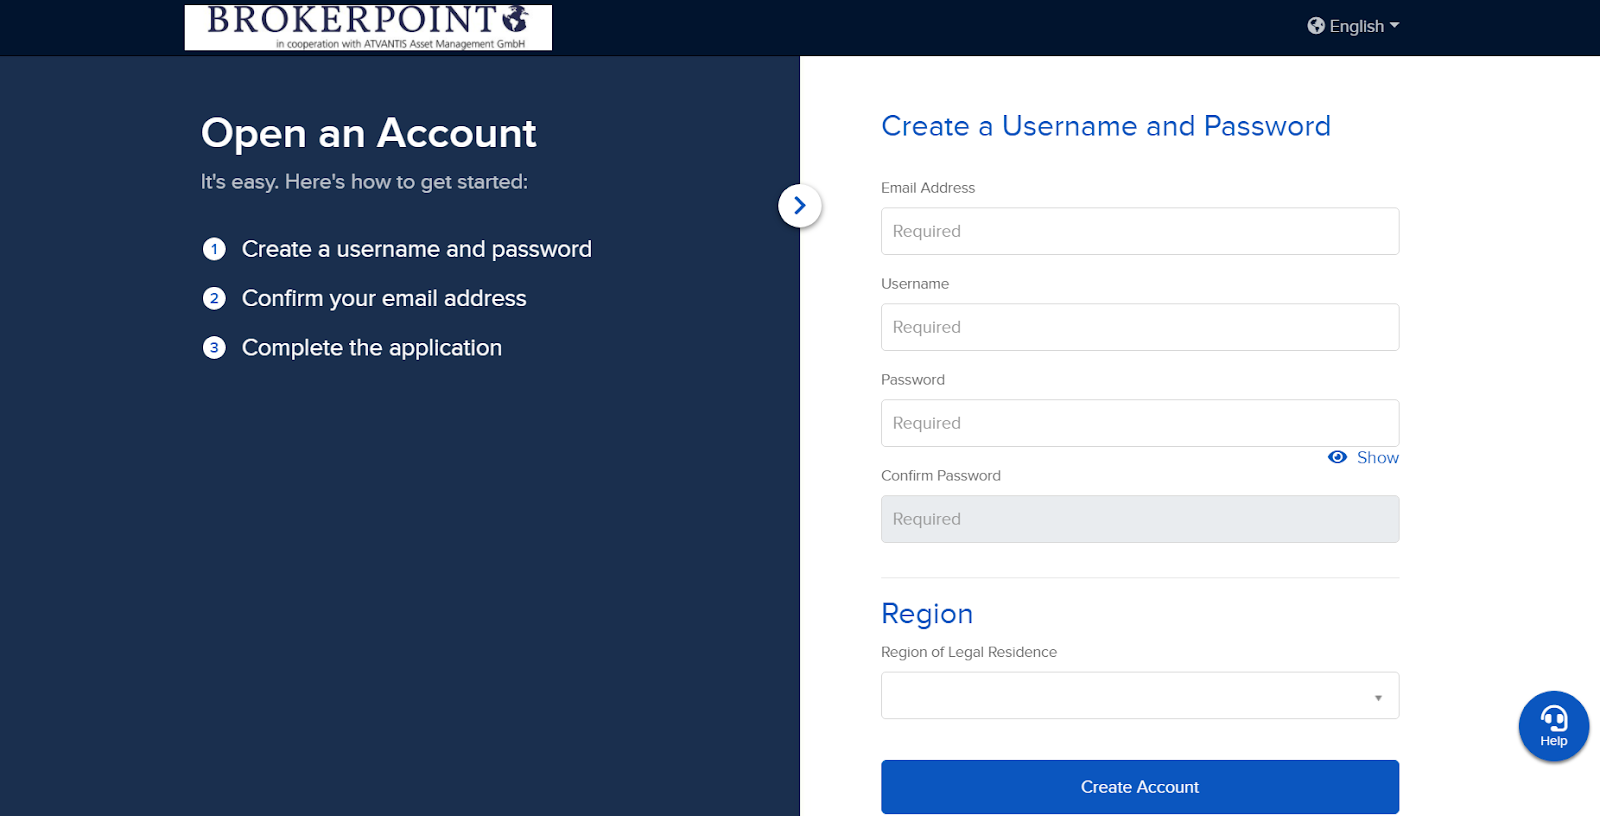 Brokerpoint’s Review - Filling out information for authentication